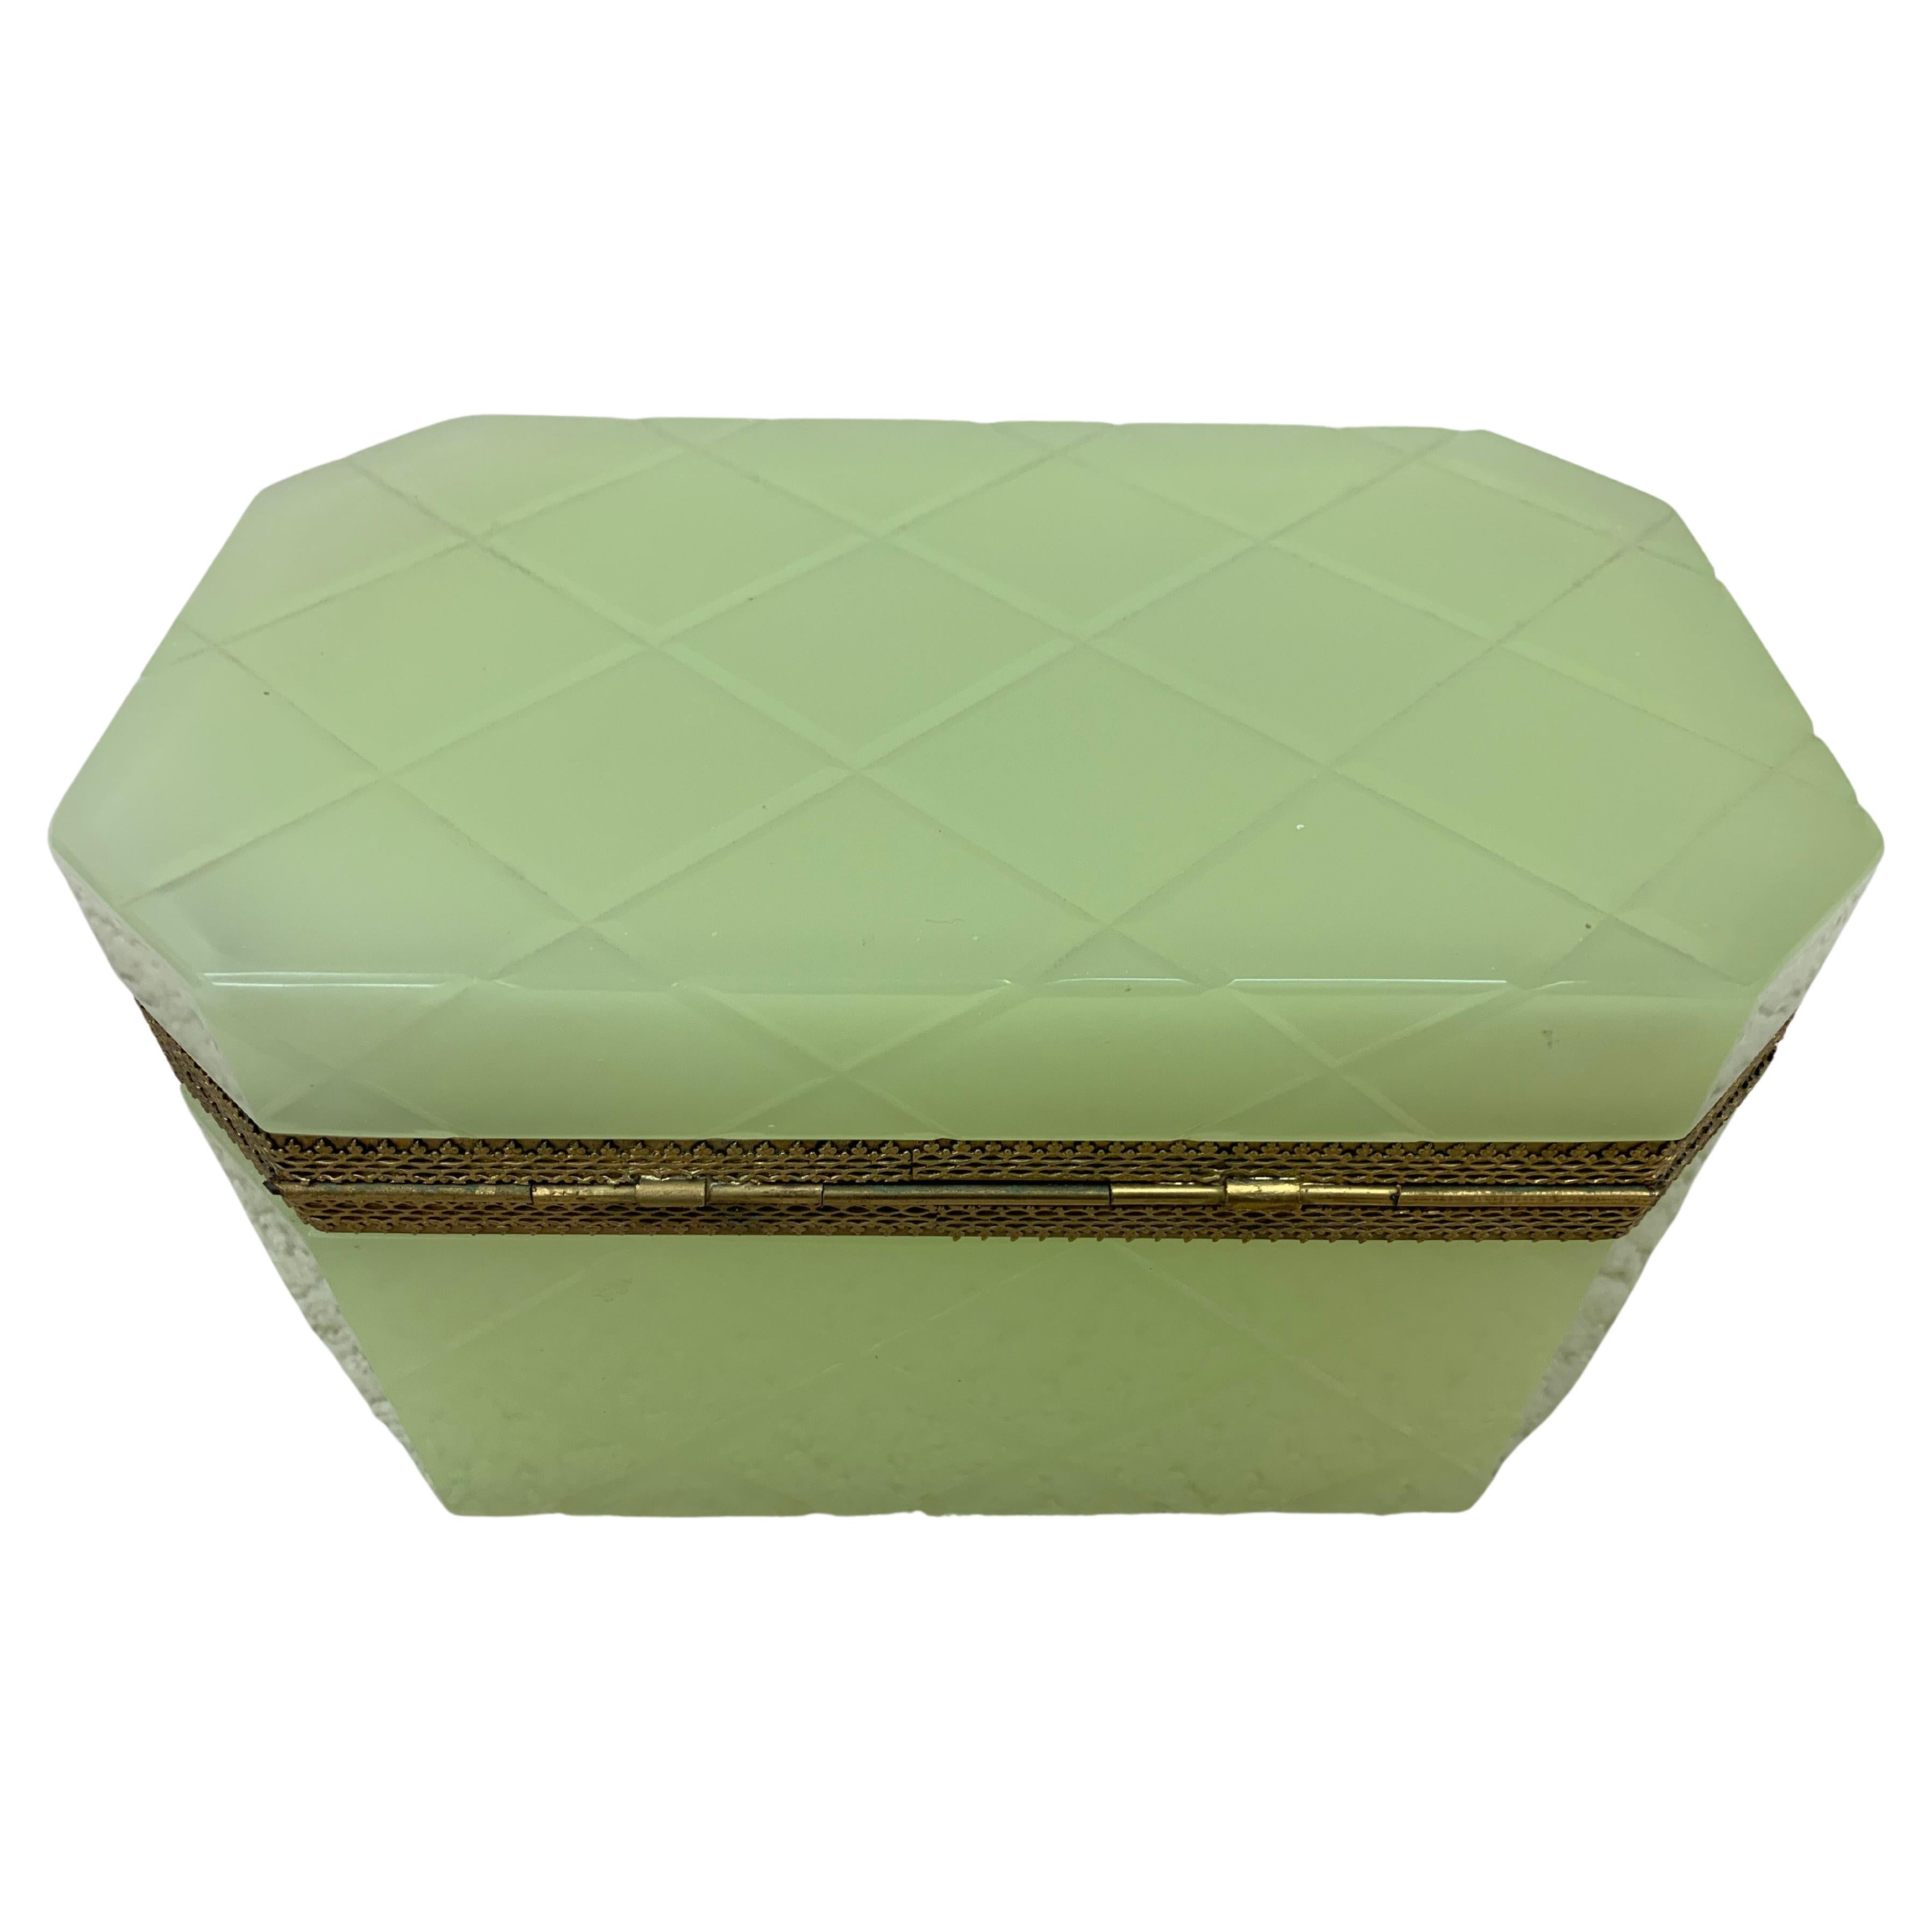 Opaline bright lime green box with hinged lid and a gorgeous gilt bronze motif. This stunning box is accented with a cross diamond pattern. Circa 1850. Dimensions 9 inches wide, 5.5 inches deep and 5 inches high.